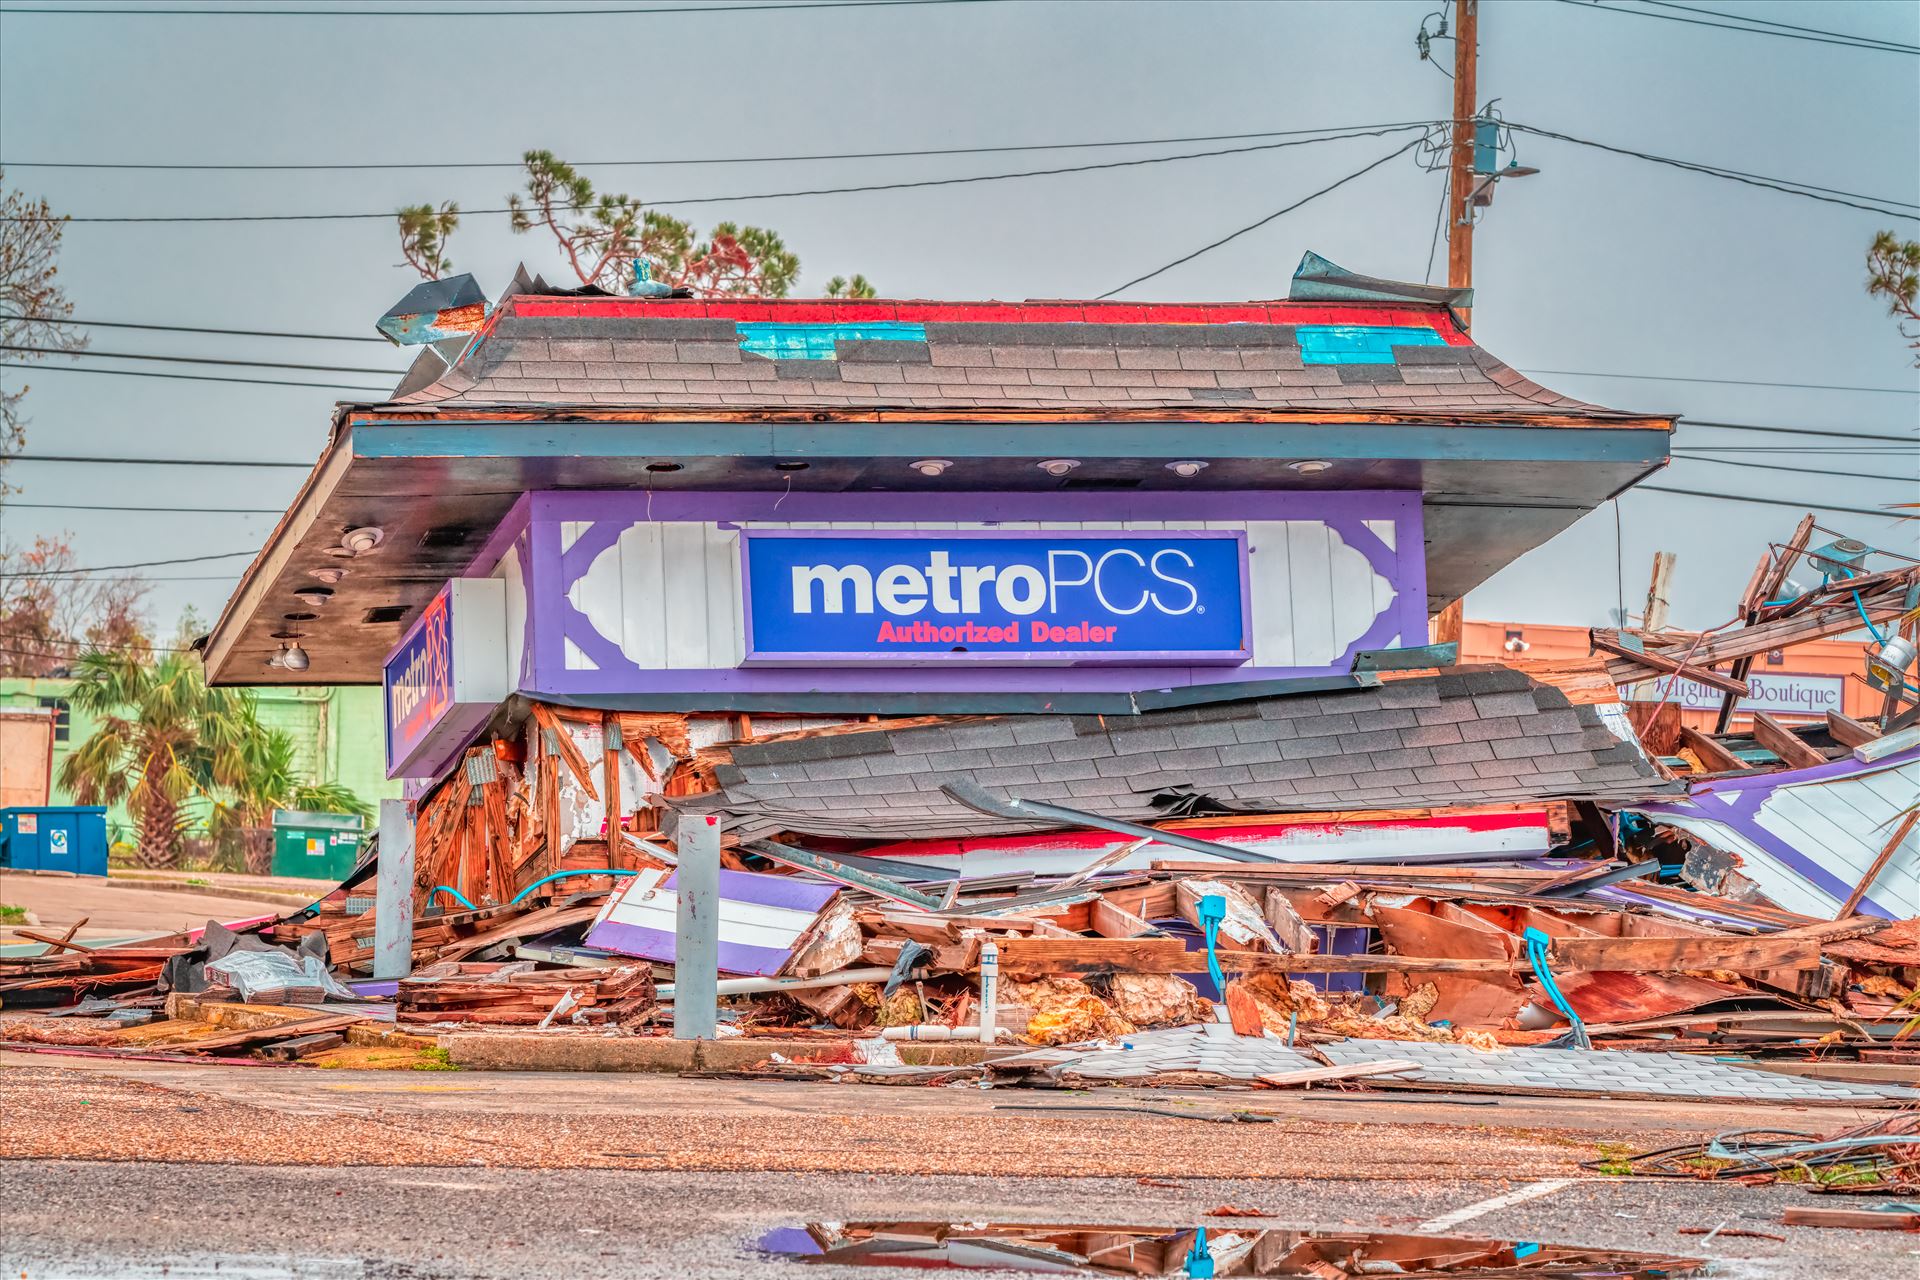 Hurricane Michael Panama City, Florida, USA. 12/30/2018 metroPCS destroyed by Hurricane Michael by Terry Kelly Photography